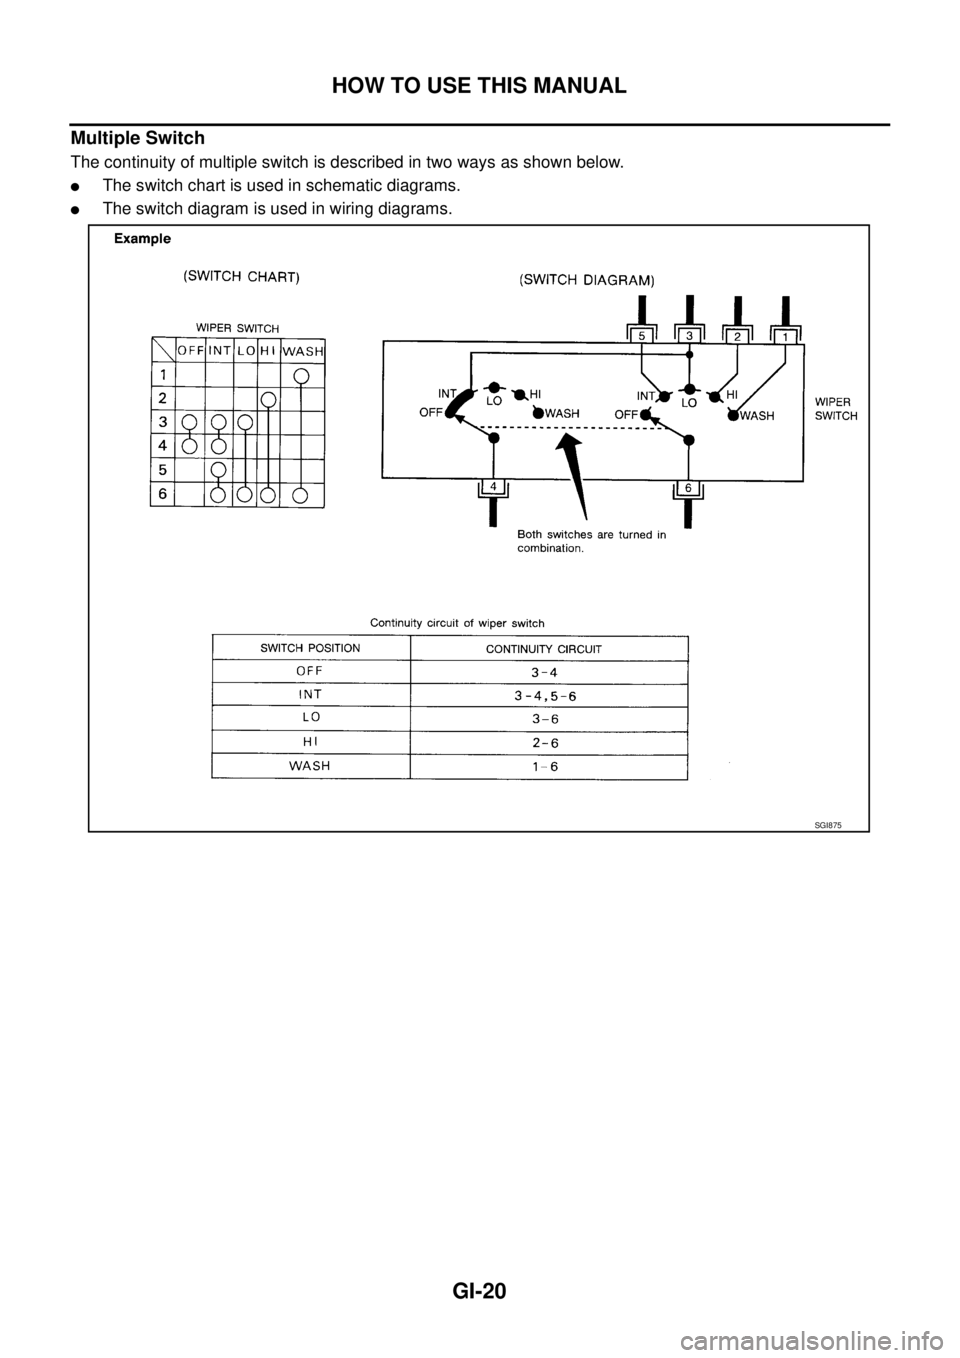 NISSAN X-TRAIL 2005  Service Repair Manual GI-20
HOW TO USE THIS MANUAL
 
Multiple Switch 
The continuity of multiple switch is described in two ways as shown below.
The switch chart is used in schematic diagrams.
The switch diagram is used 